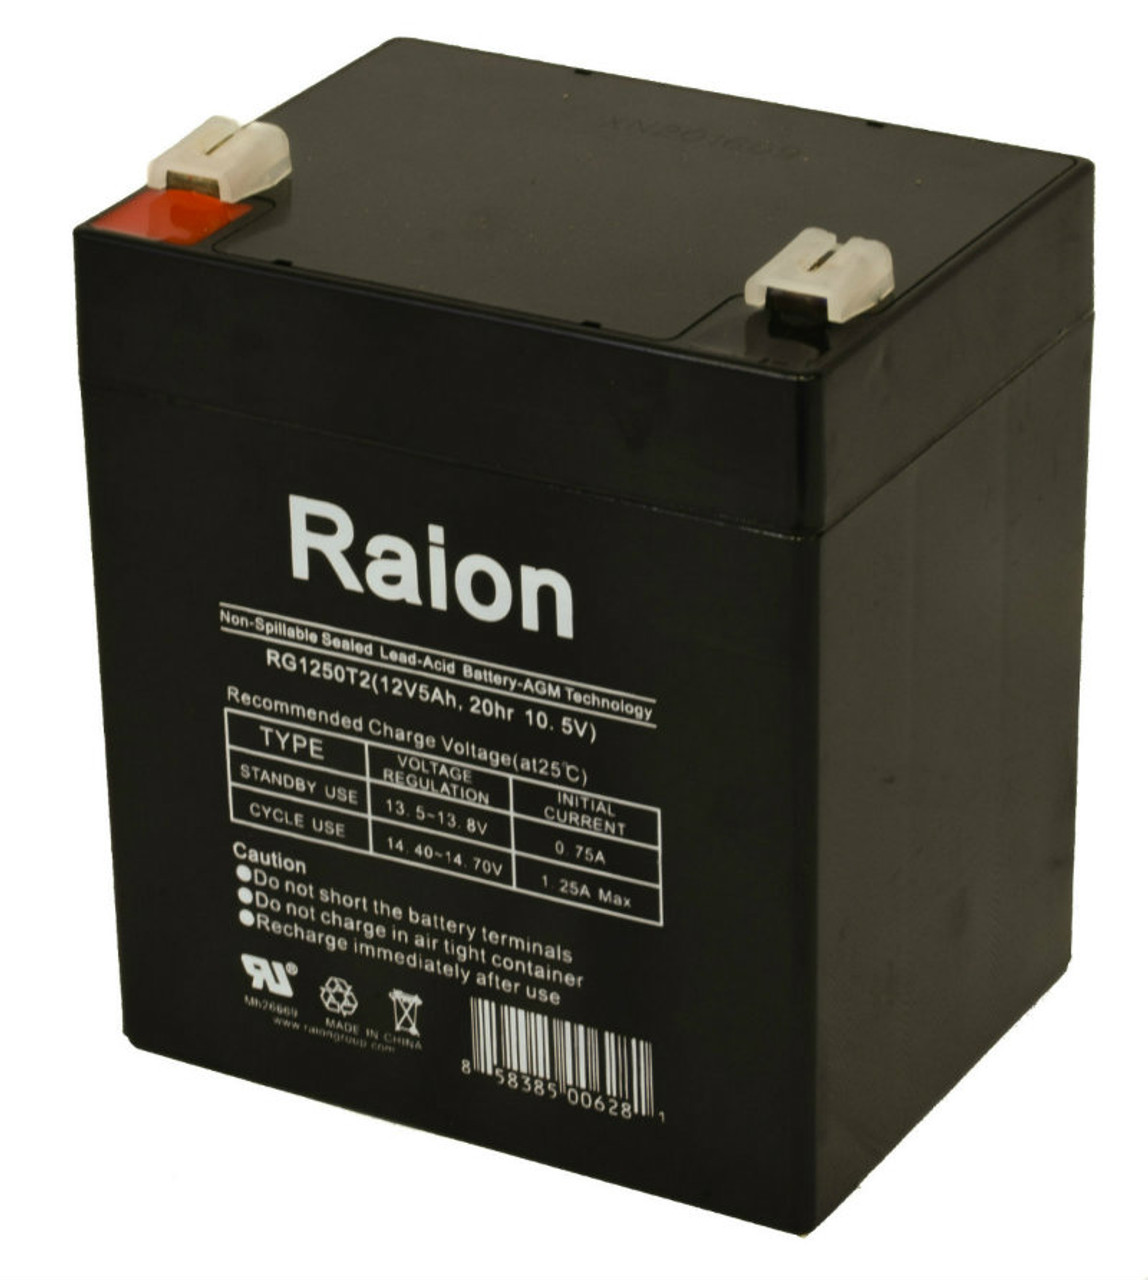 Raion Power 12V 5Ah Replacement Fire Alarm Control Panel Battery for Digital Security Power432